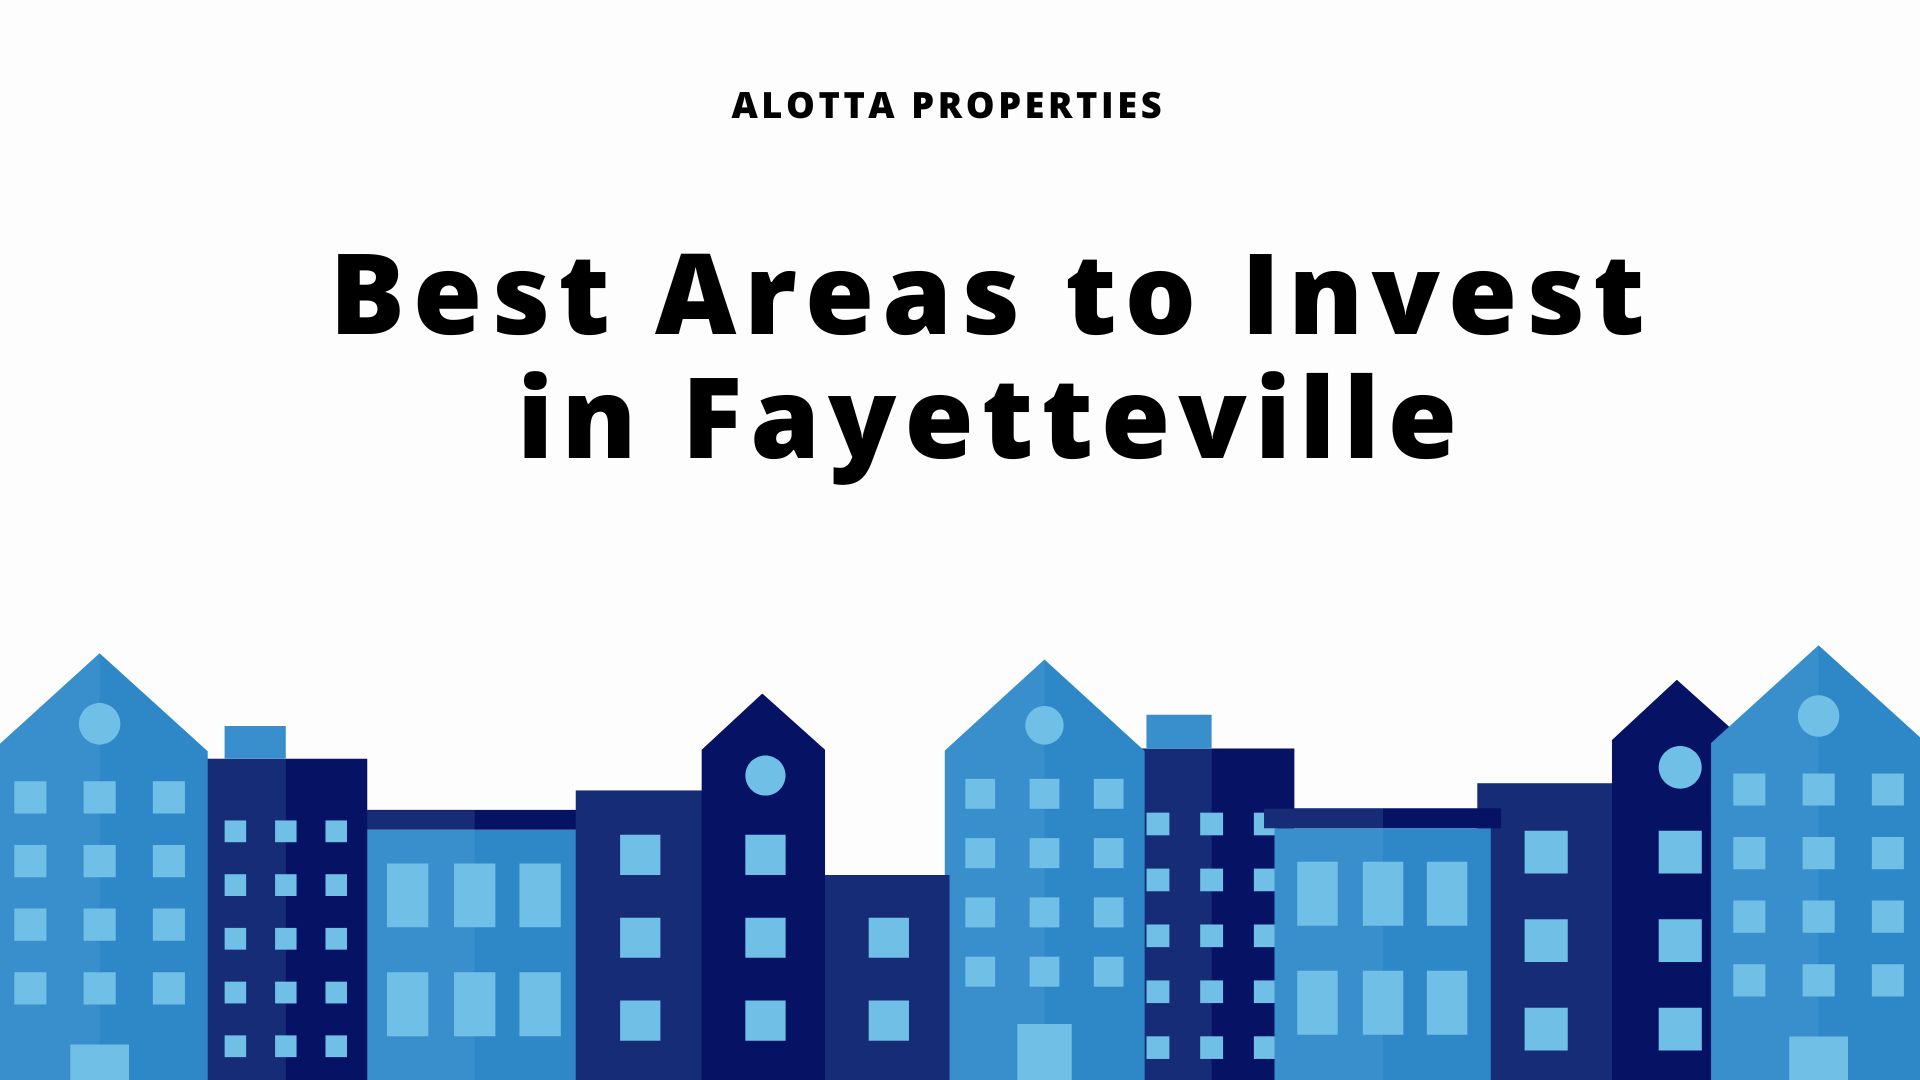 Best Areas to Invest in Fayetteville